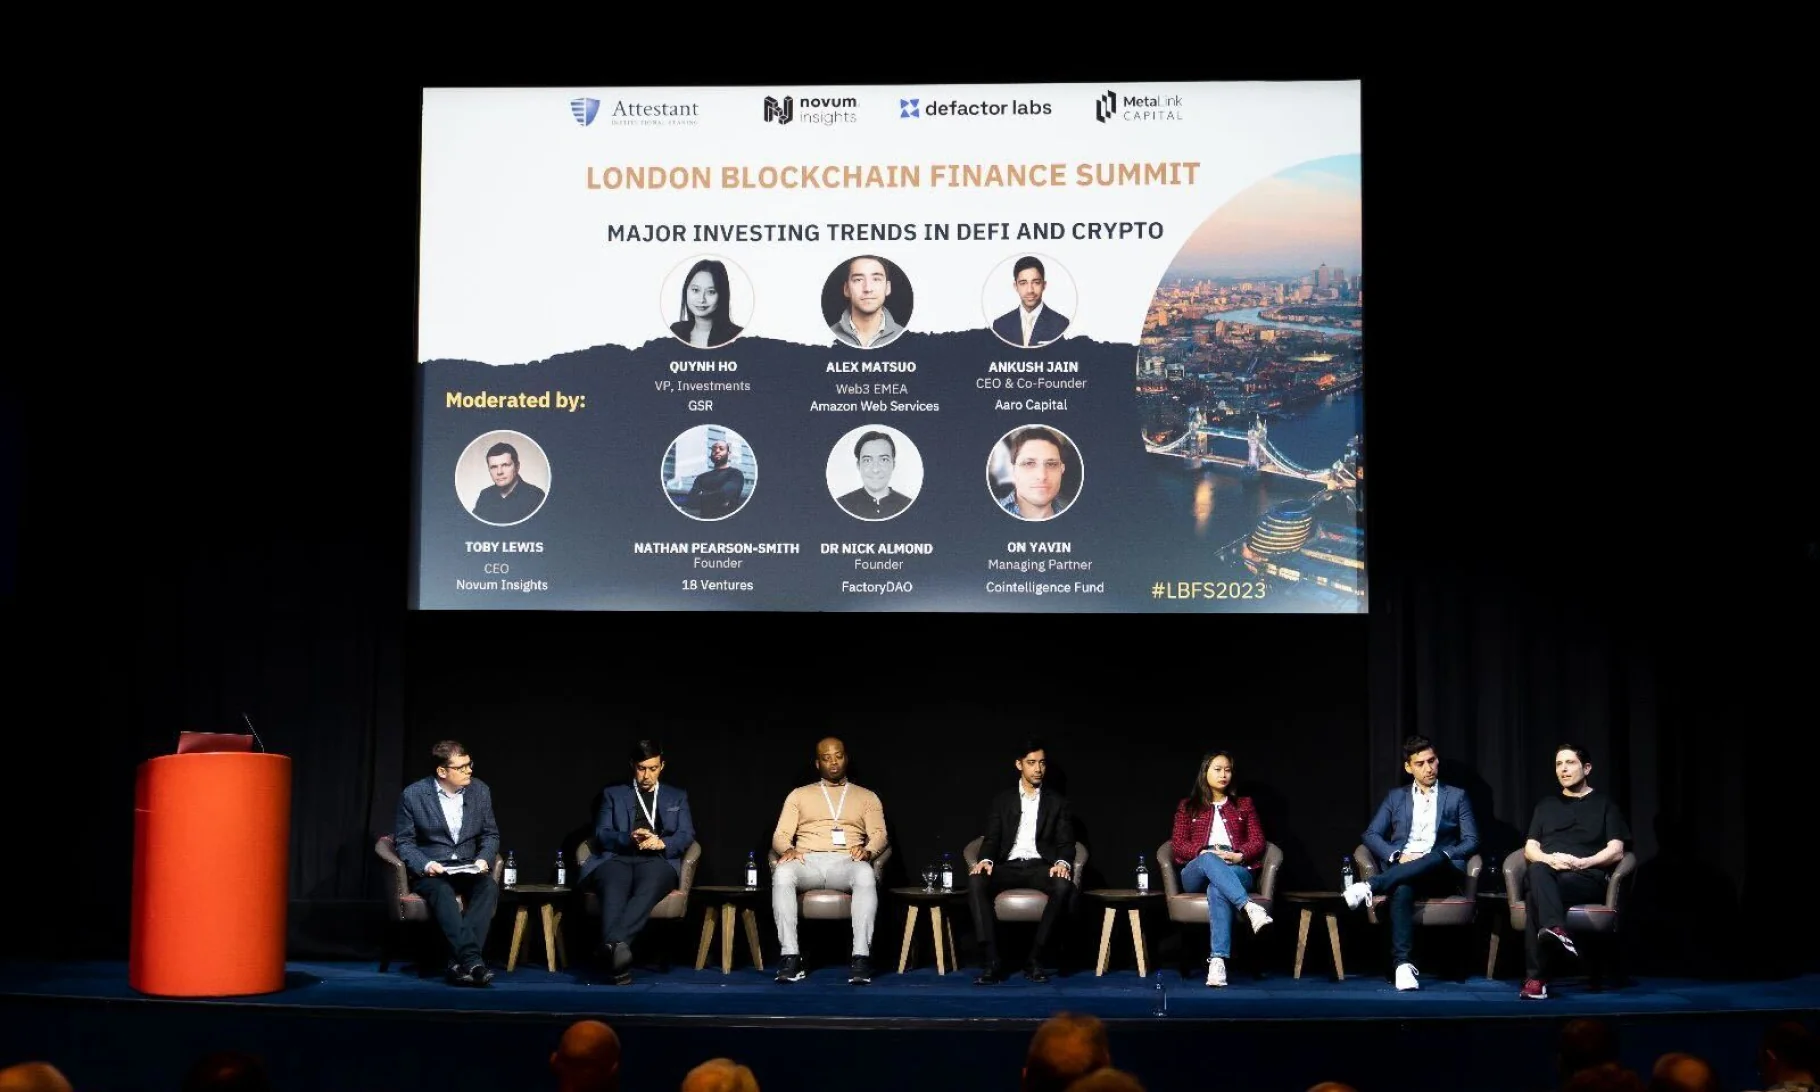 This image describes On Yavin speaking about major investing trends in DeFi and crypto at the London Blockchain Finance Summit.